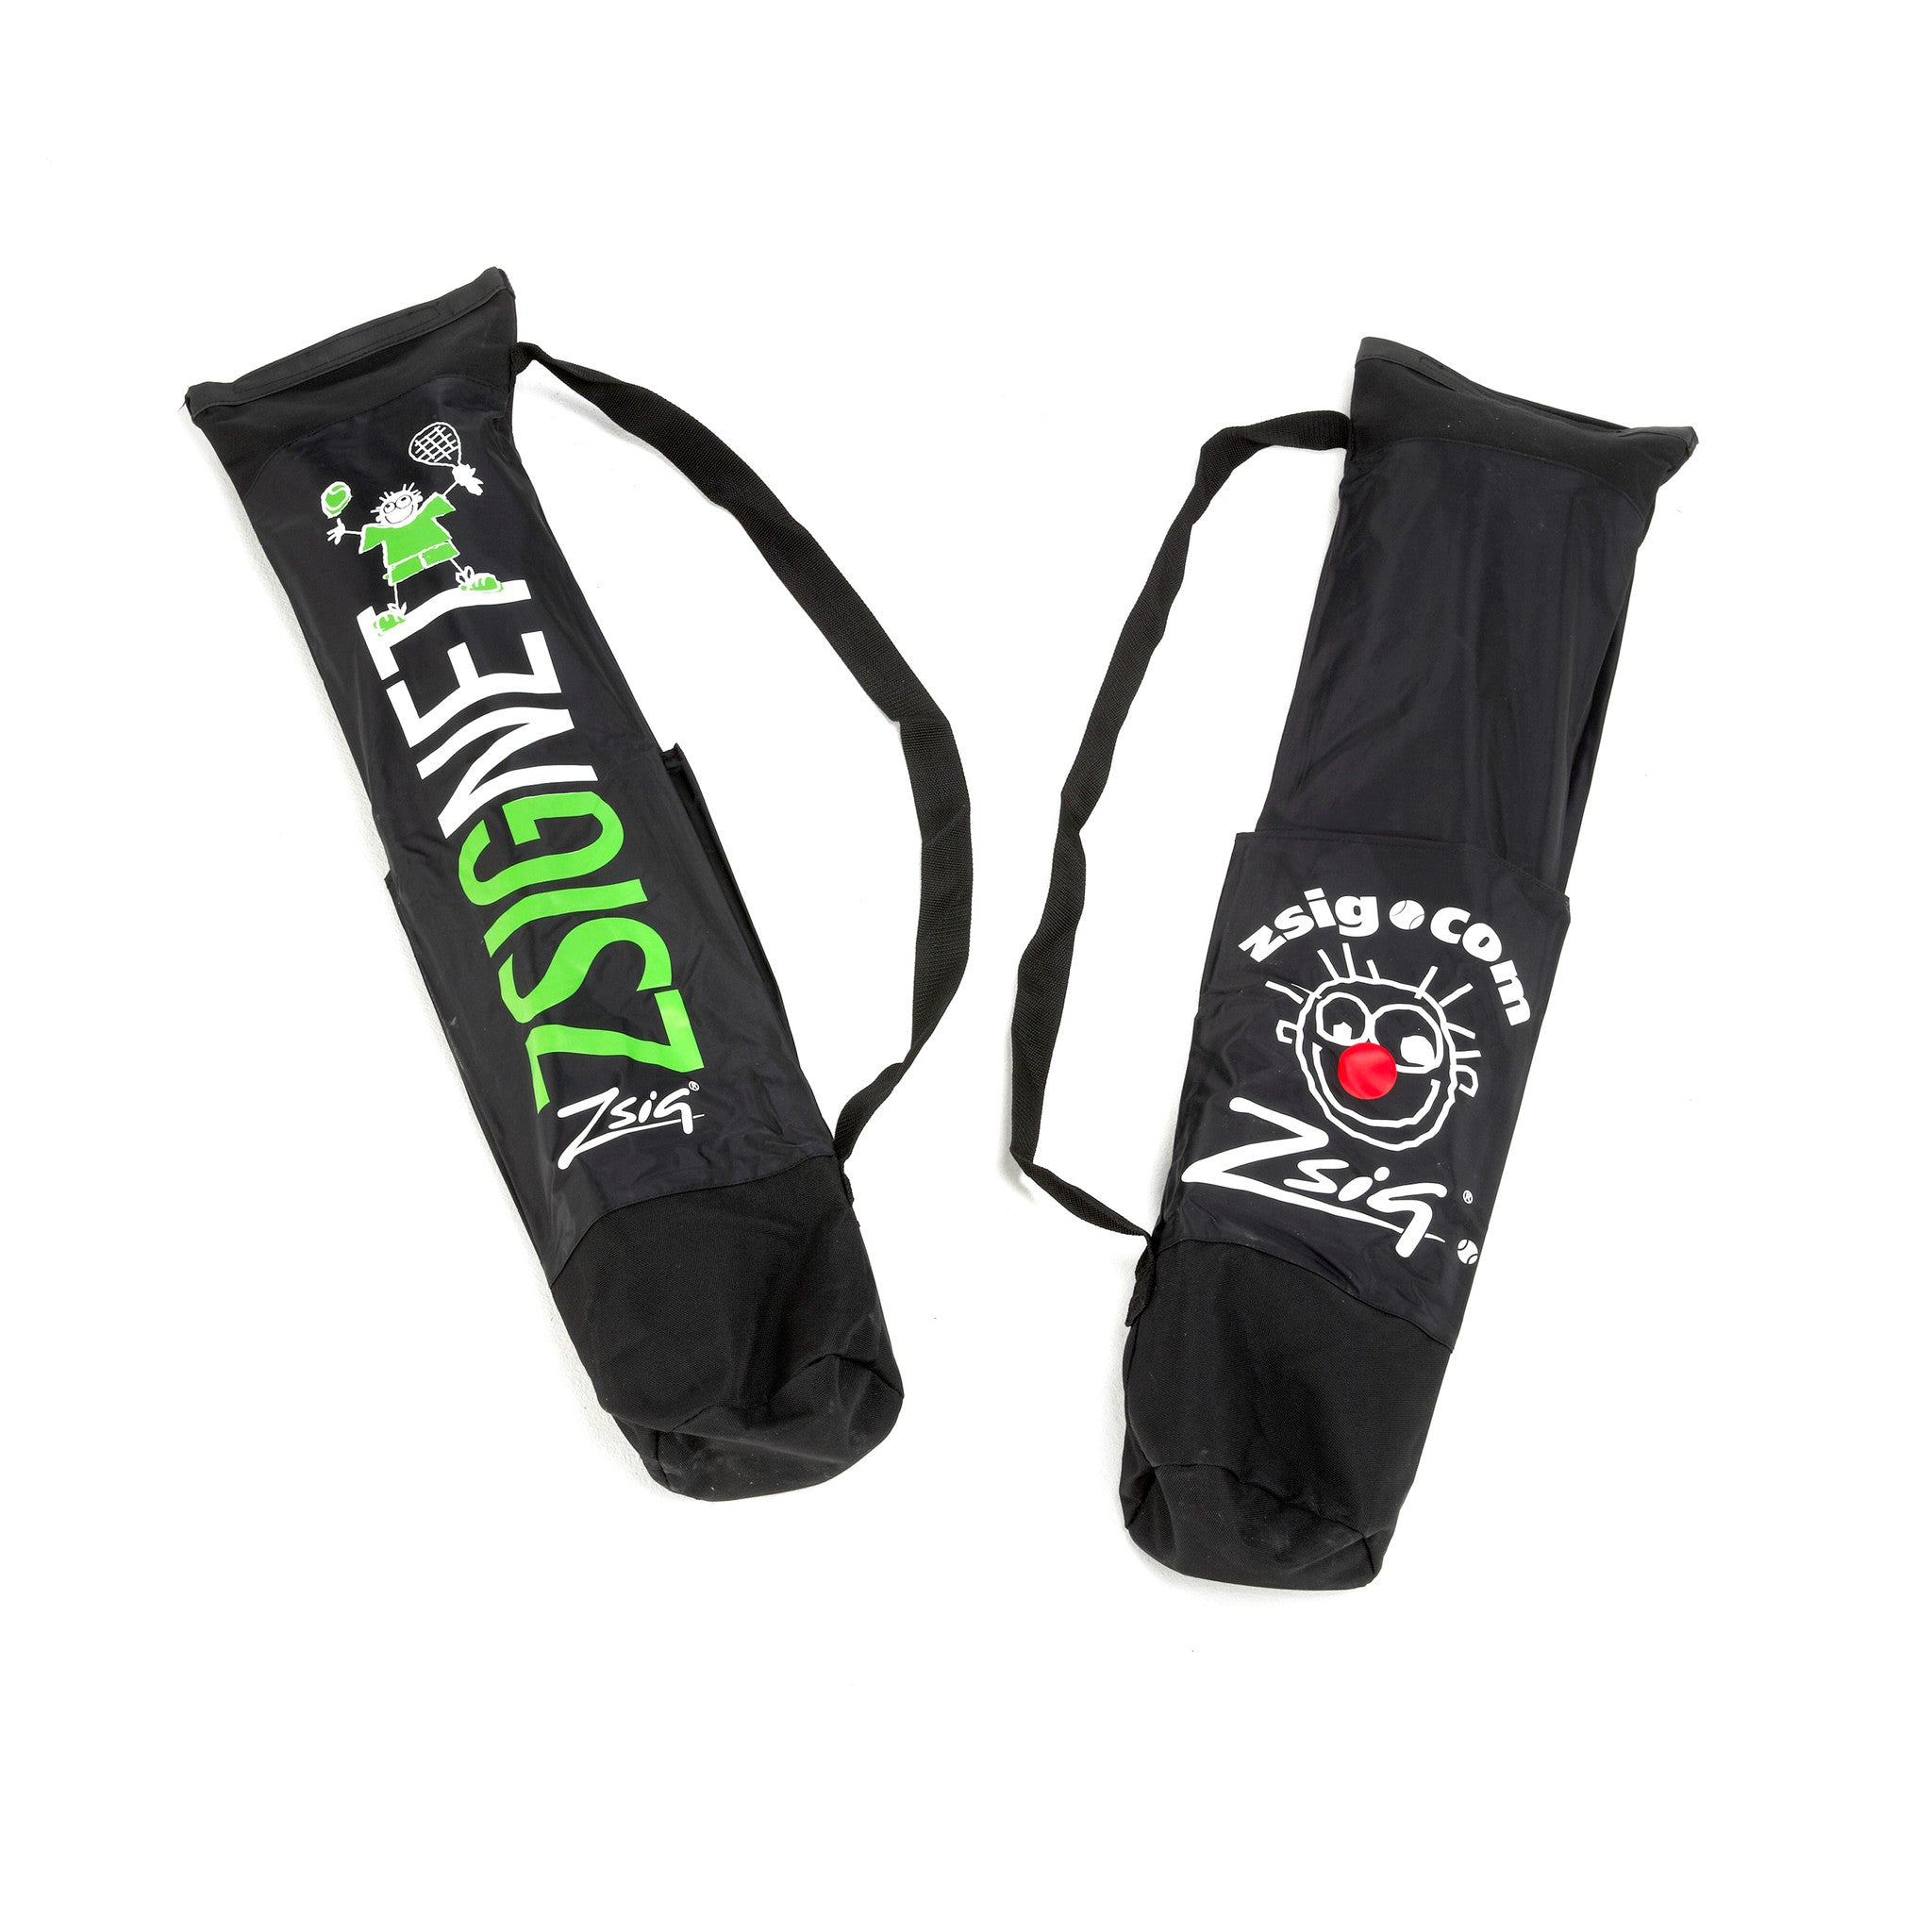 Mini Tennis Net Carry Bag for Zsignet 10 3m System - from Zsig. Shows pockets for folded net.